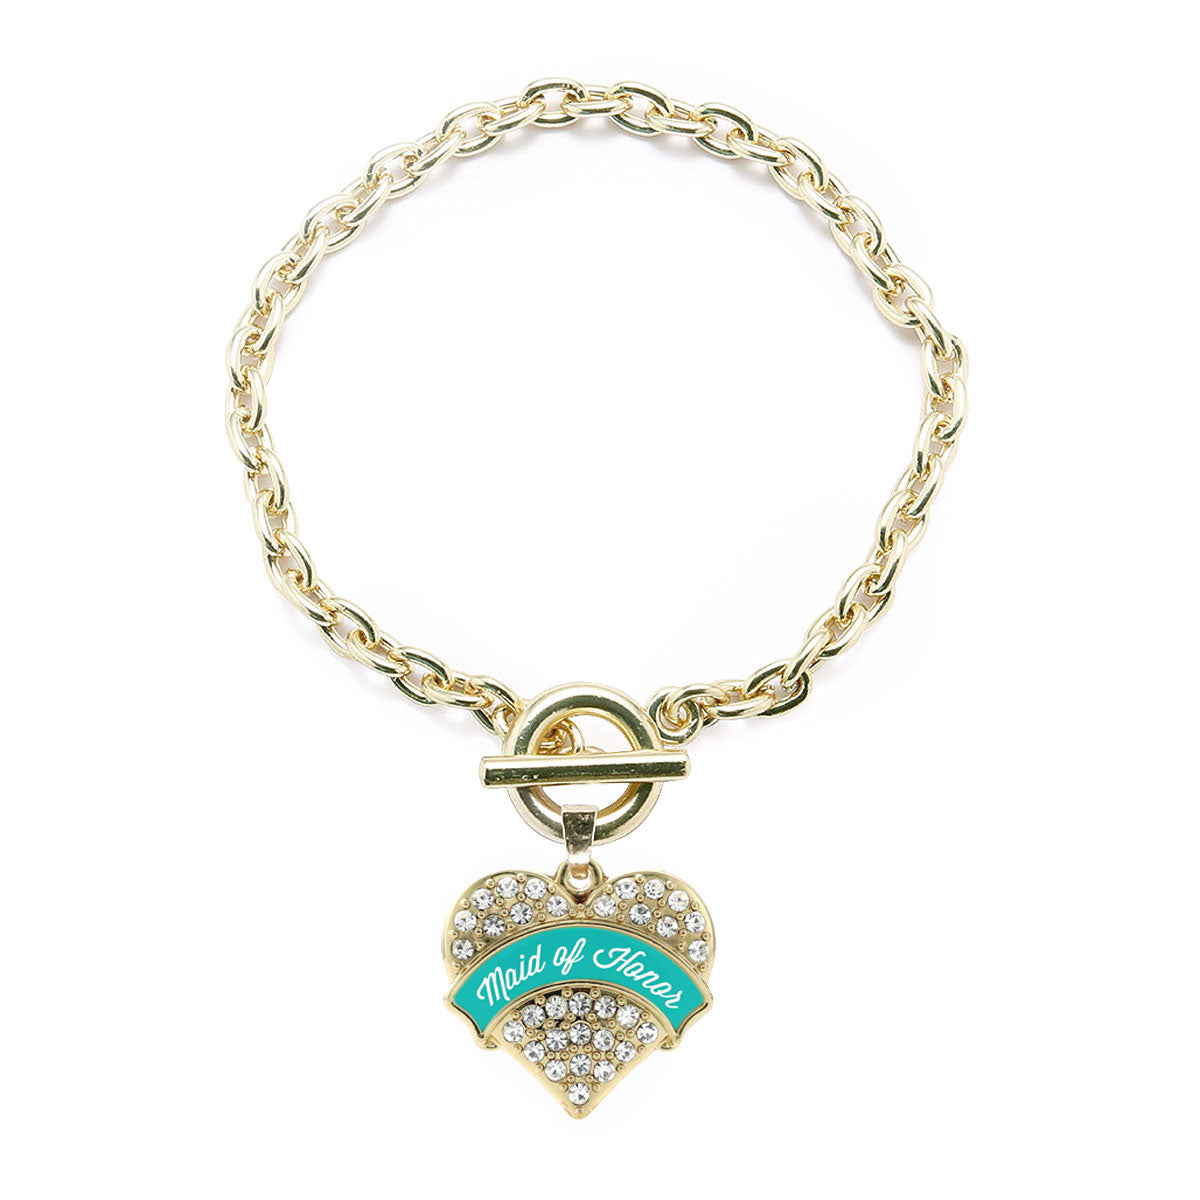 Gold Teal Maid of Honor Pave Heart Charm Toggle Bracelet